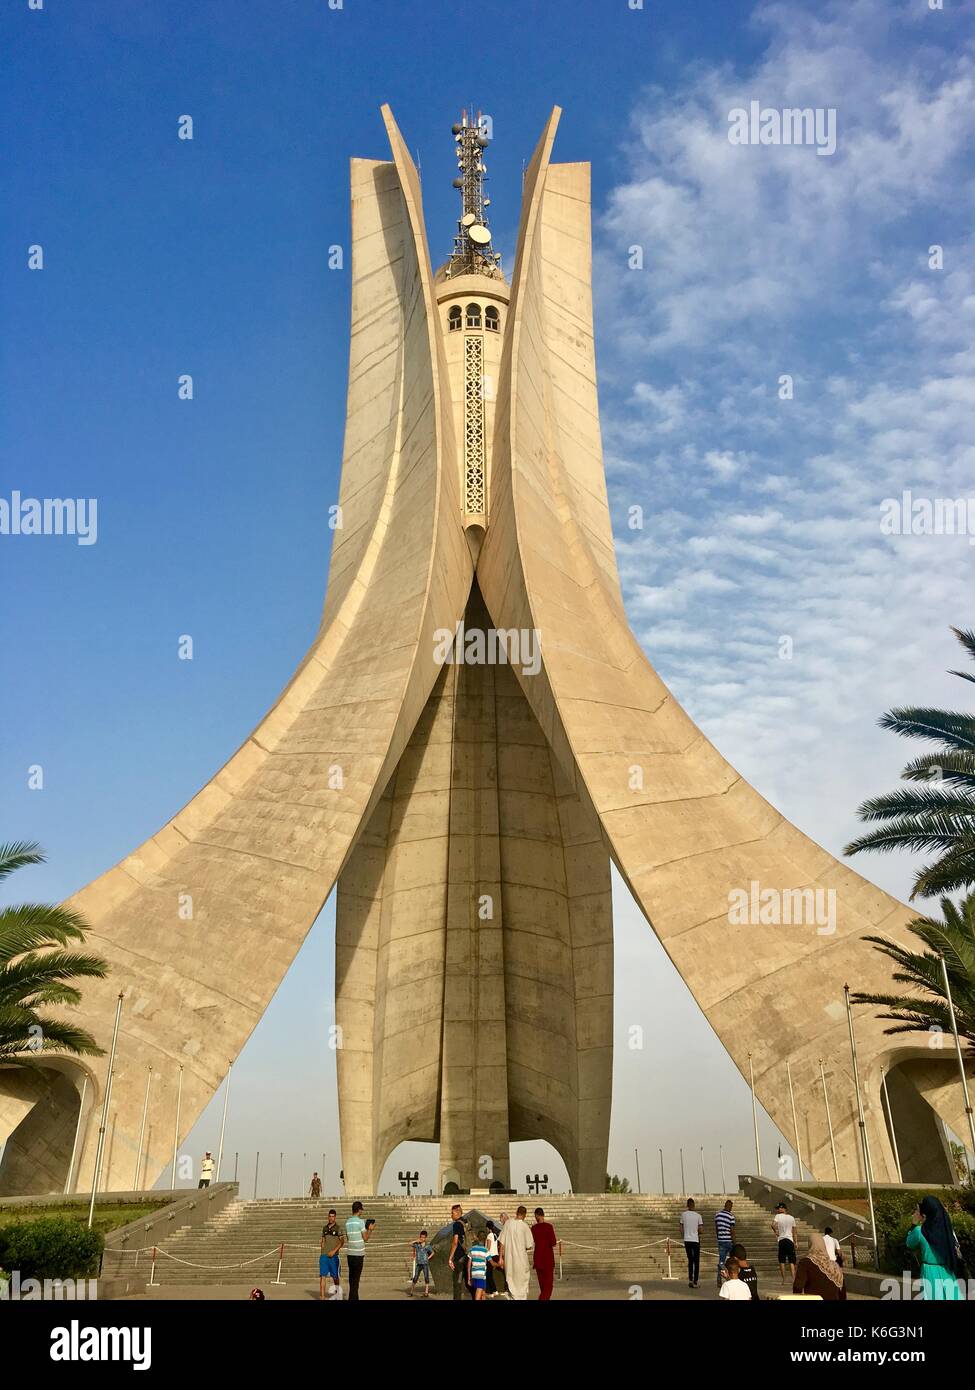 The Maqam Echahid  monument. Opened in 1982 for 20th anniversary of Algeria independence built in the shape of three standing palm leaves. Stock Photo